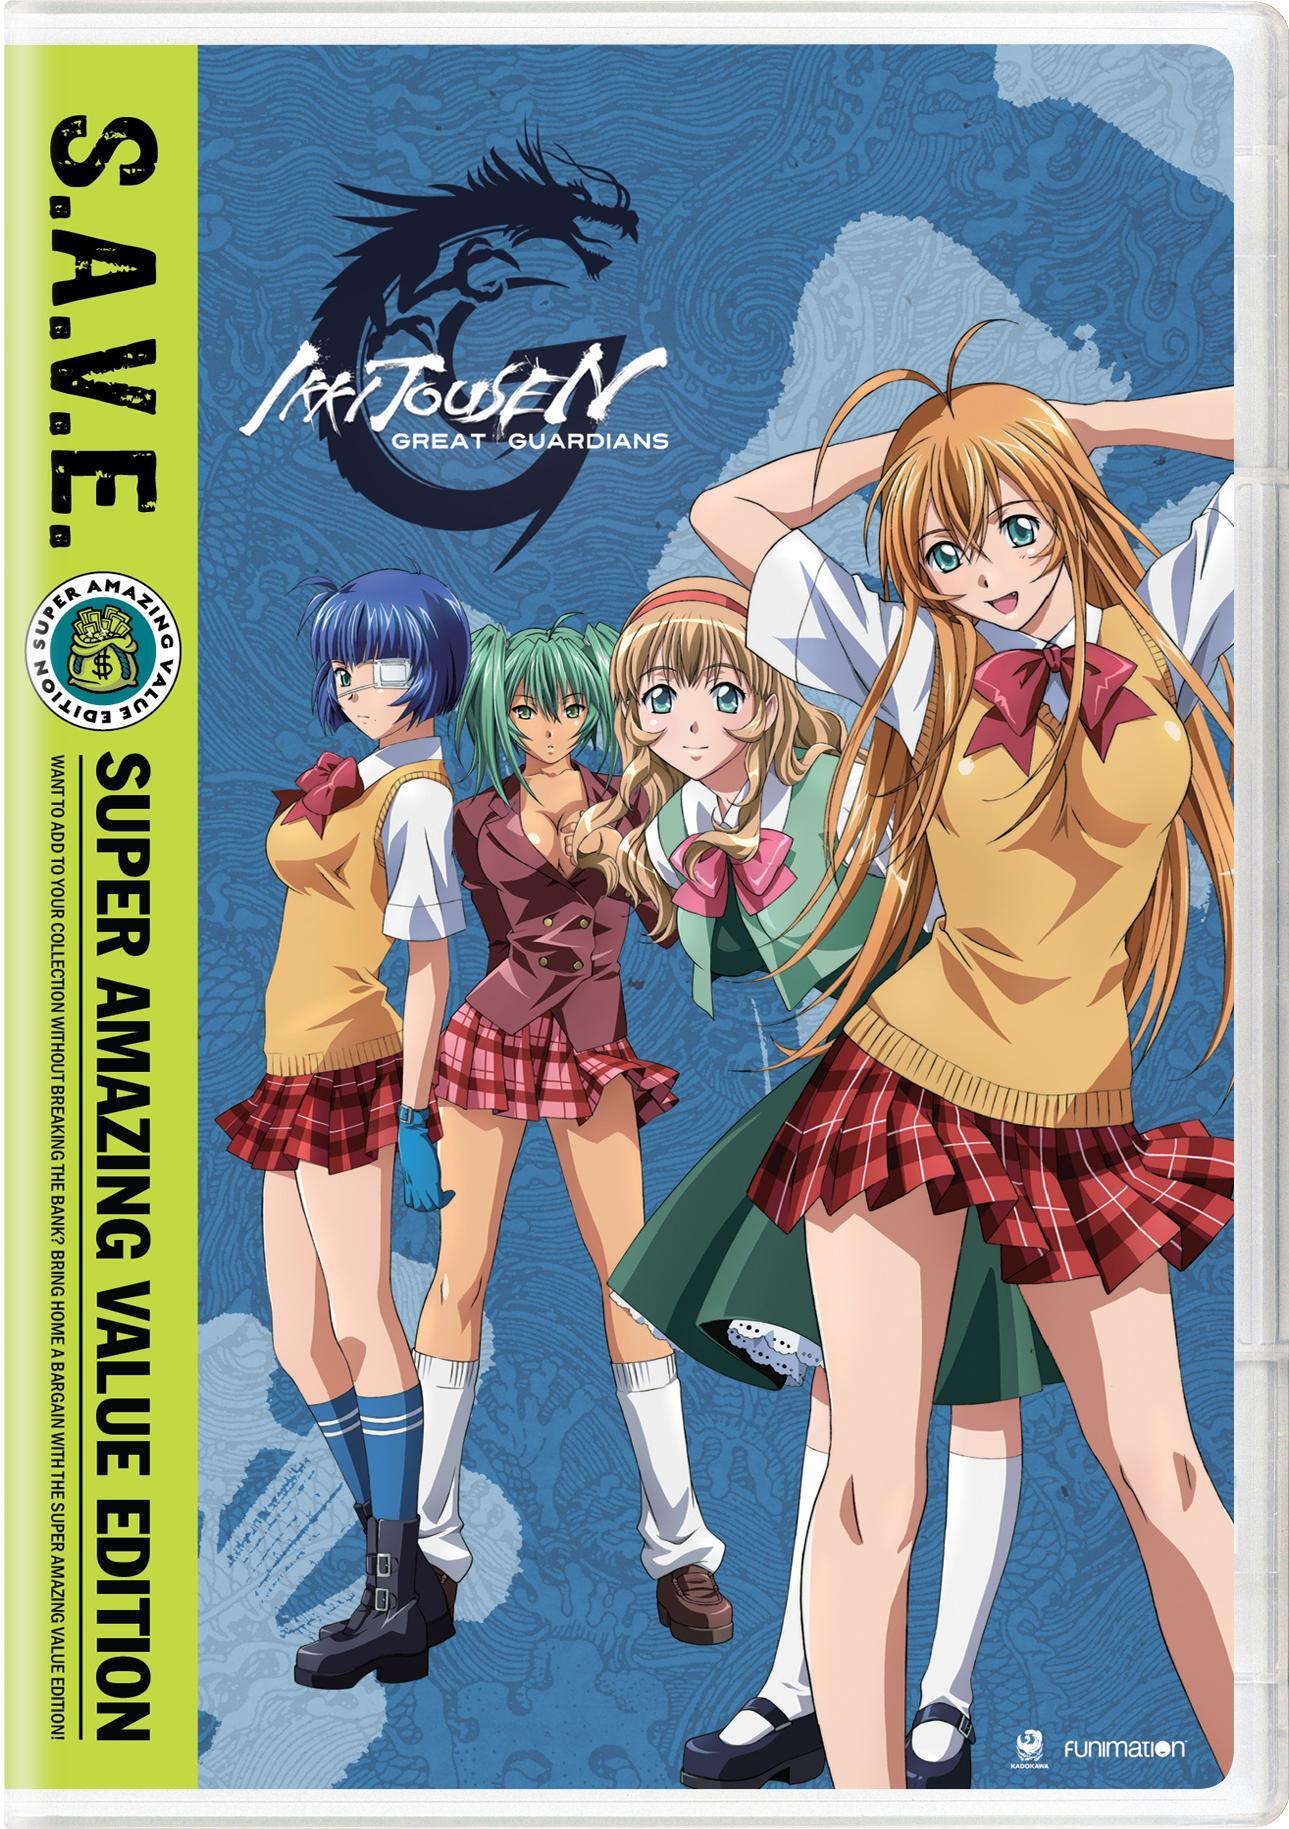 Ikki Tousen: Great Guardians Collection - DVD [ 2008 ]  - Anime Television On DVD - TV Shows On GRUV